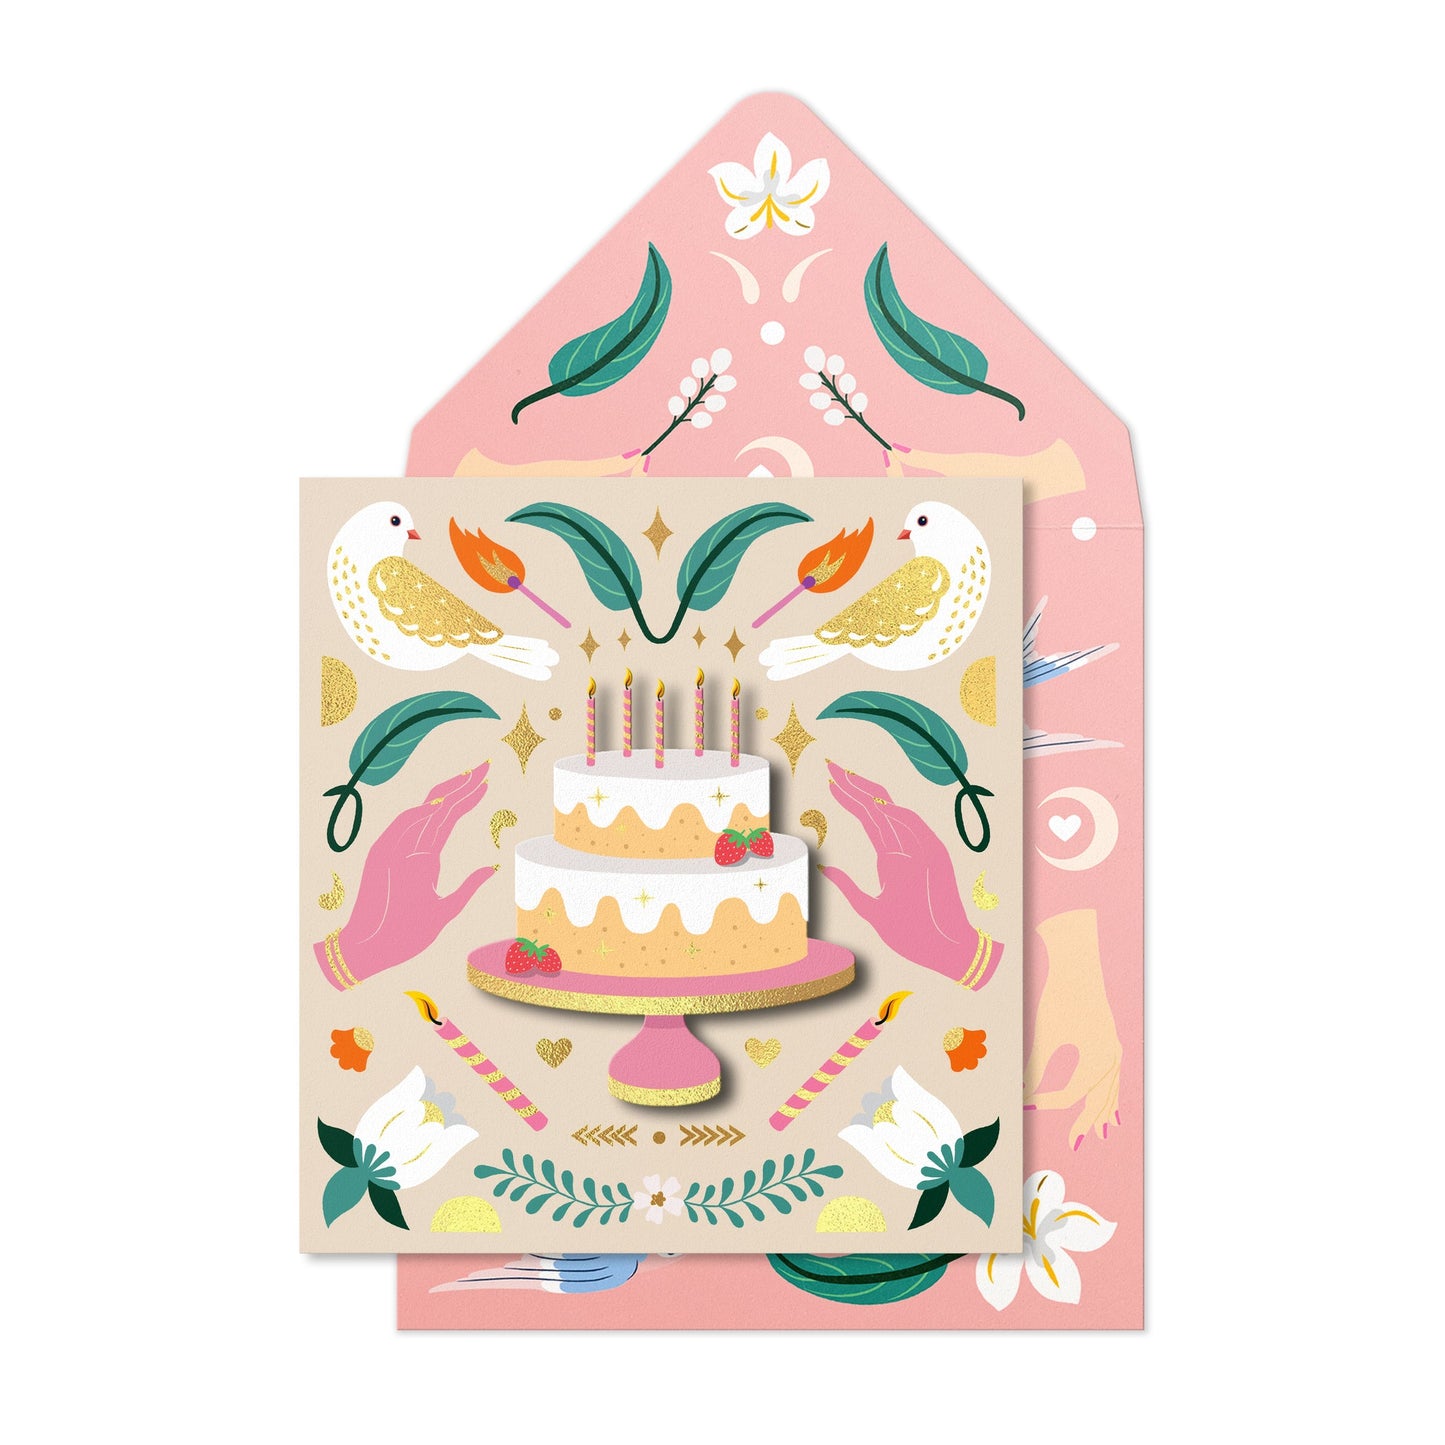 Big Cake With Candles Birthday Card - Muddy Boots Home UK